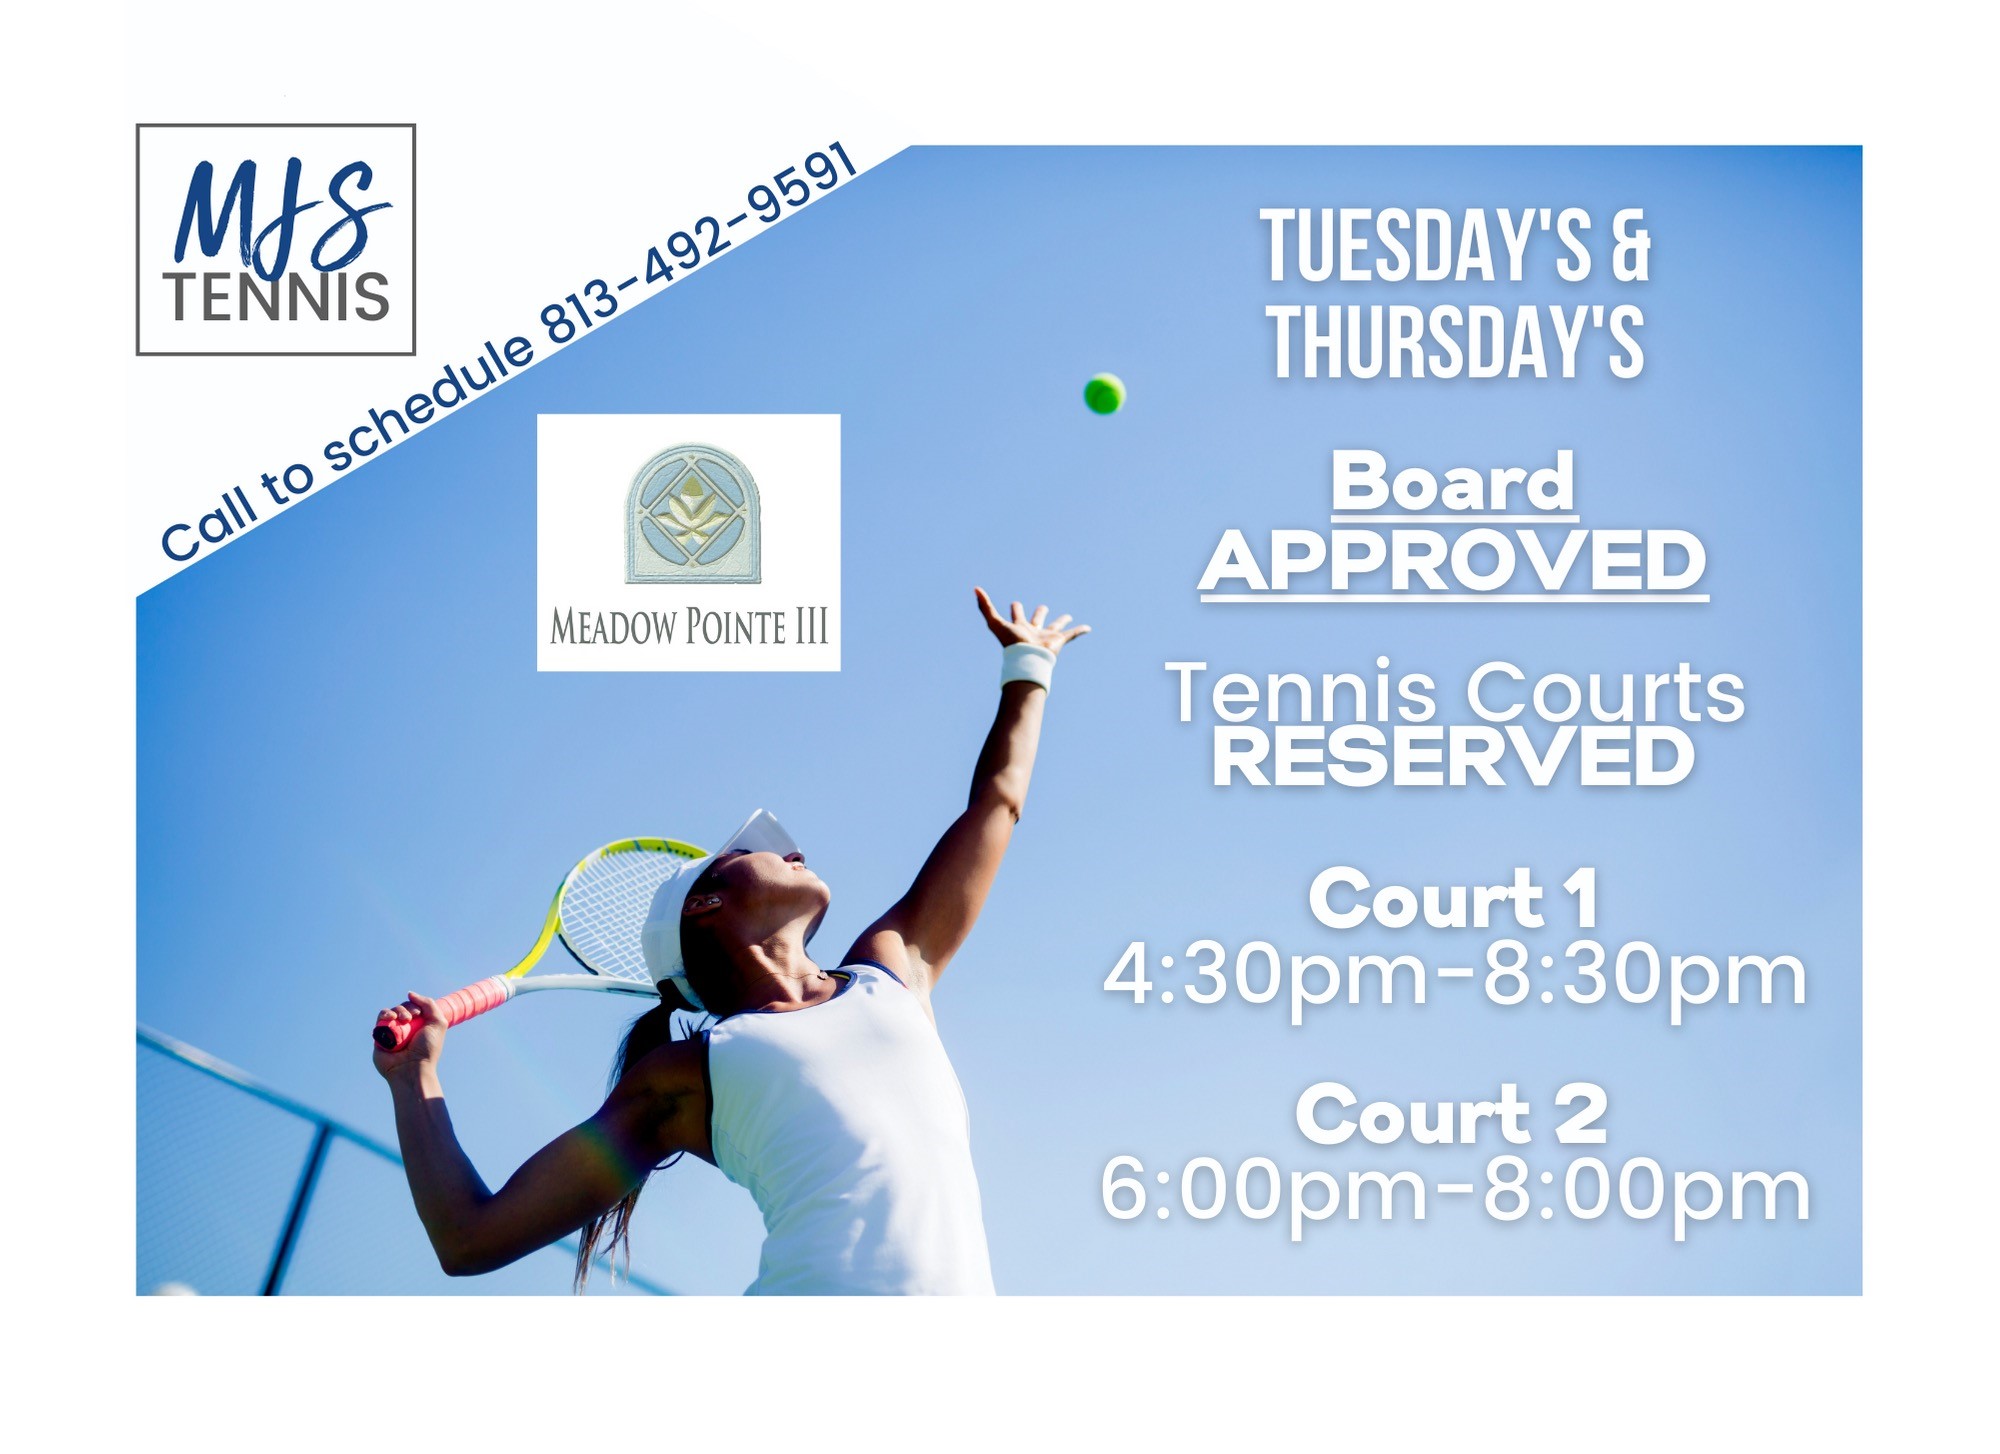 MJS Tennis Call to Schedule 813-492-9591 Tuesdays & Thursdays Board Approved Tennis Courts Reserved Court 1 4:30pm-8:30pm Court 2 6:00pm-8:00pm